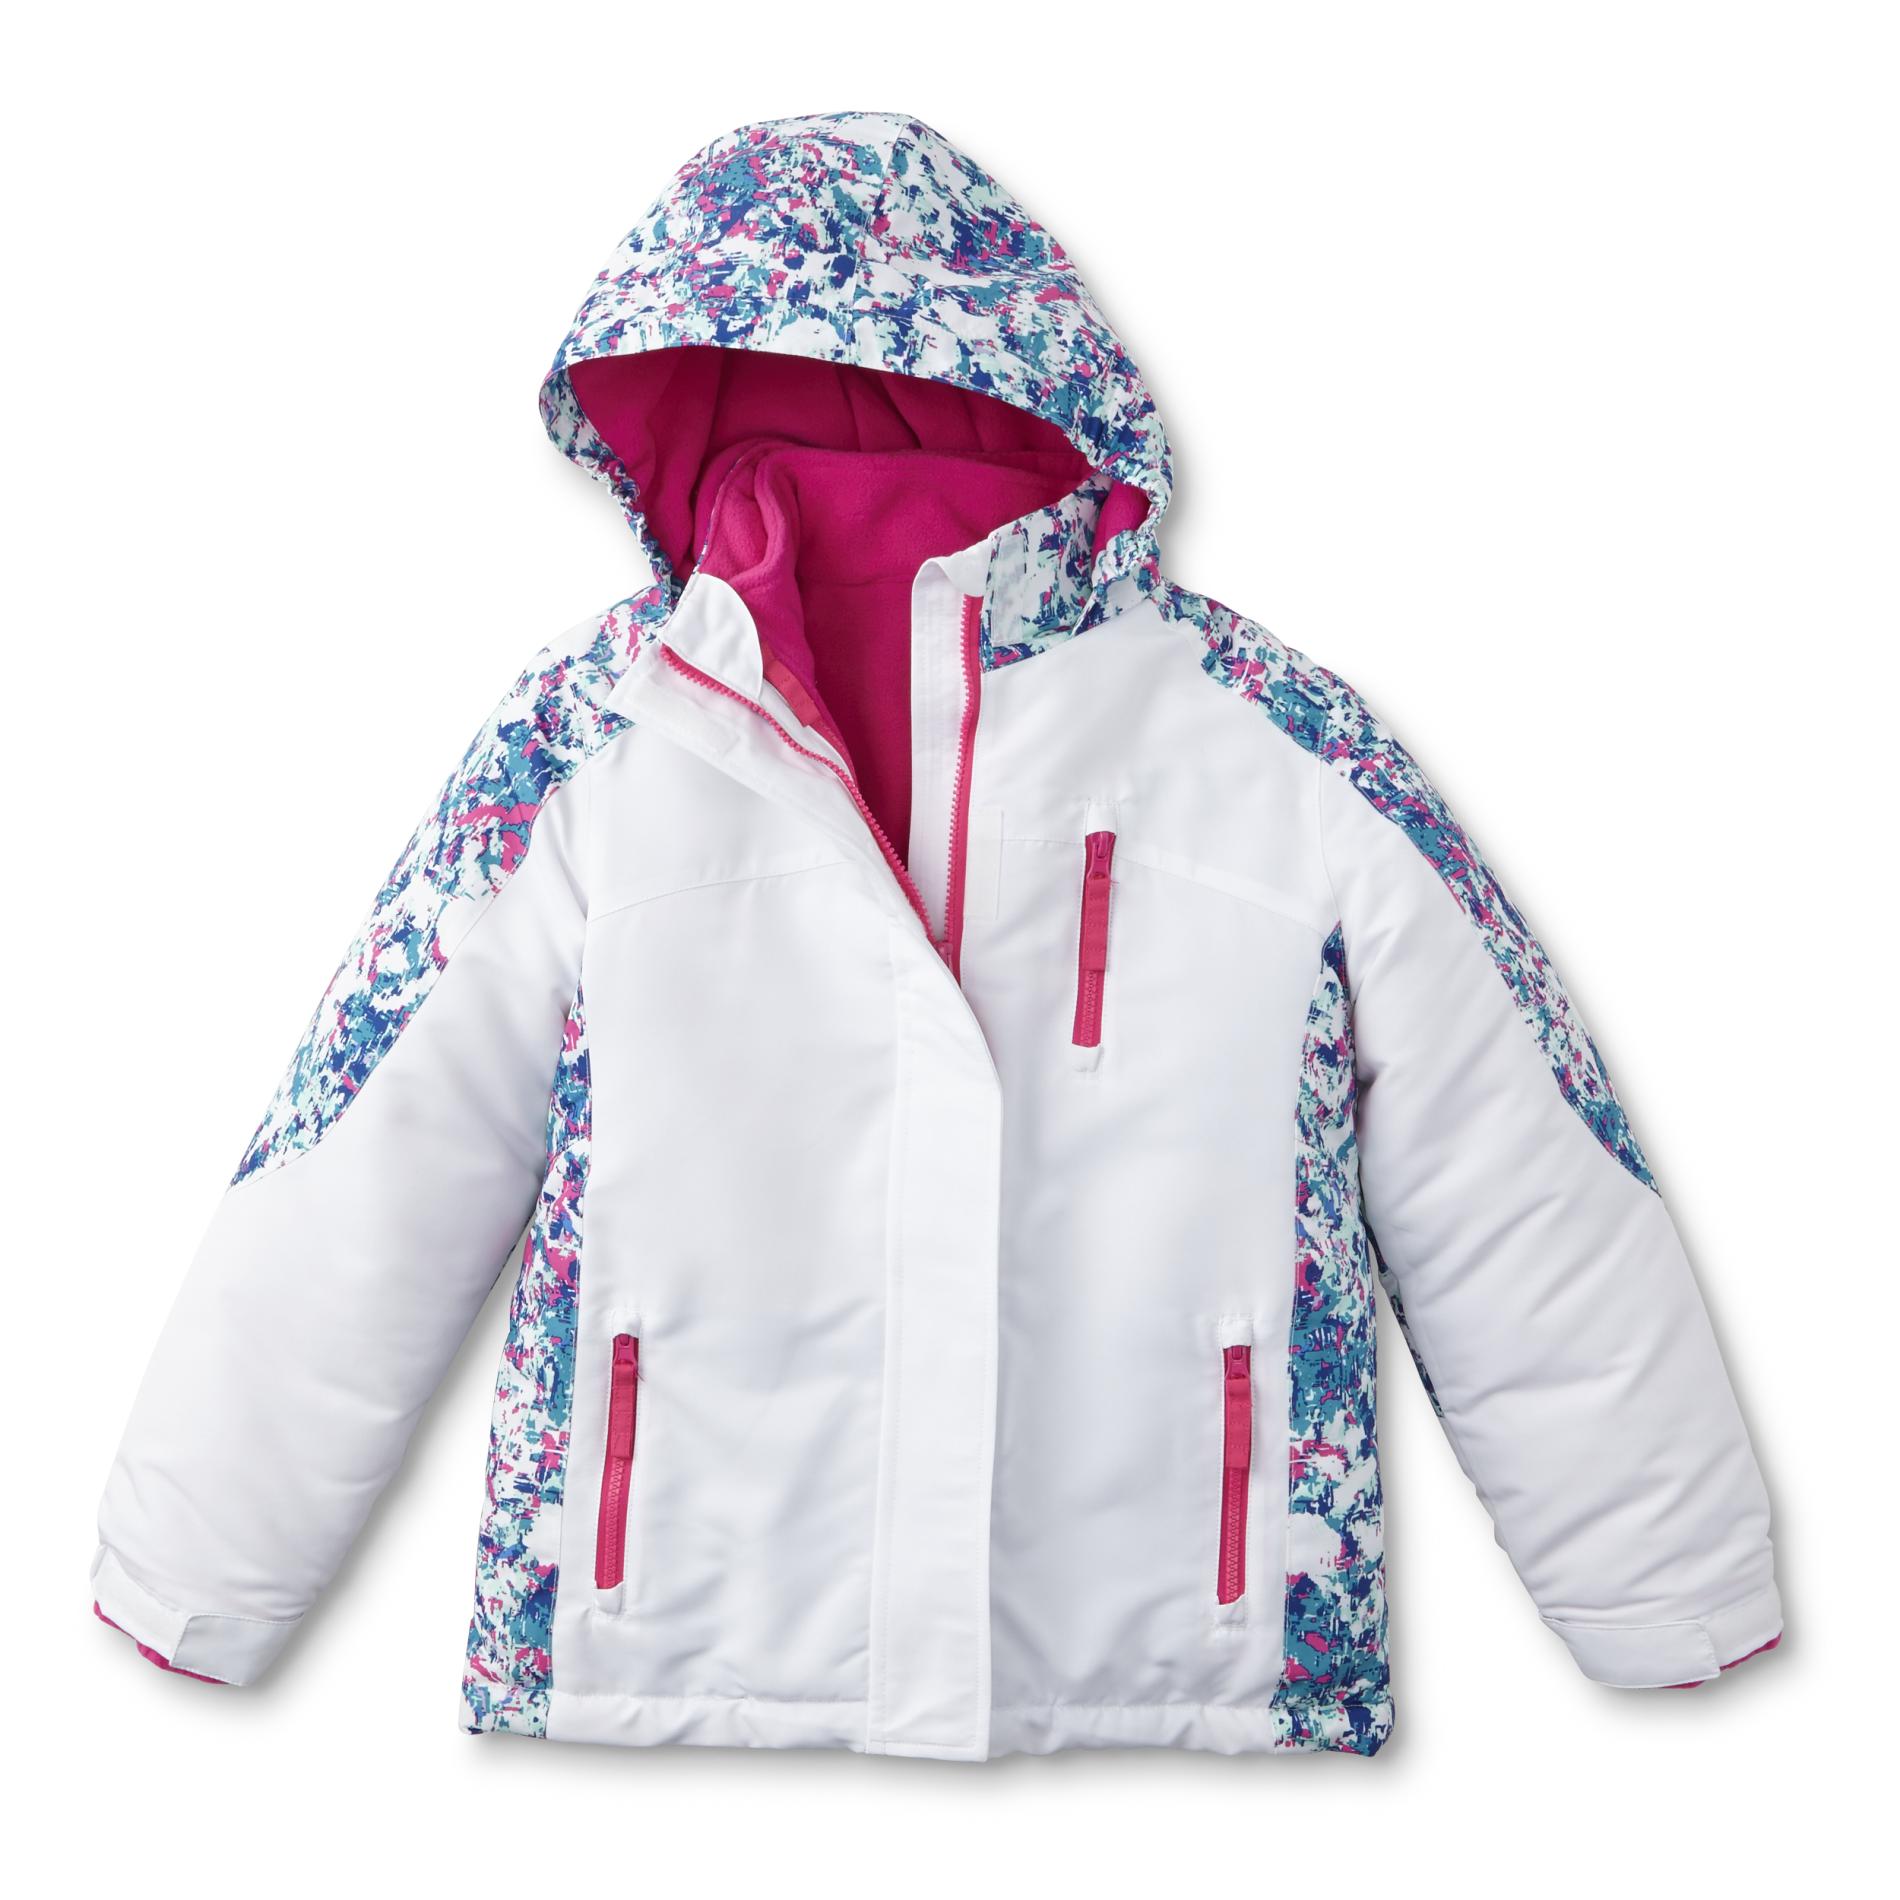 ROEBUCK & CO R1893 Girls' 3-in-1 Winter System Jacket - Abstract